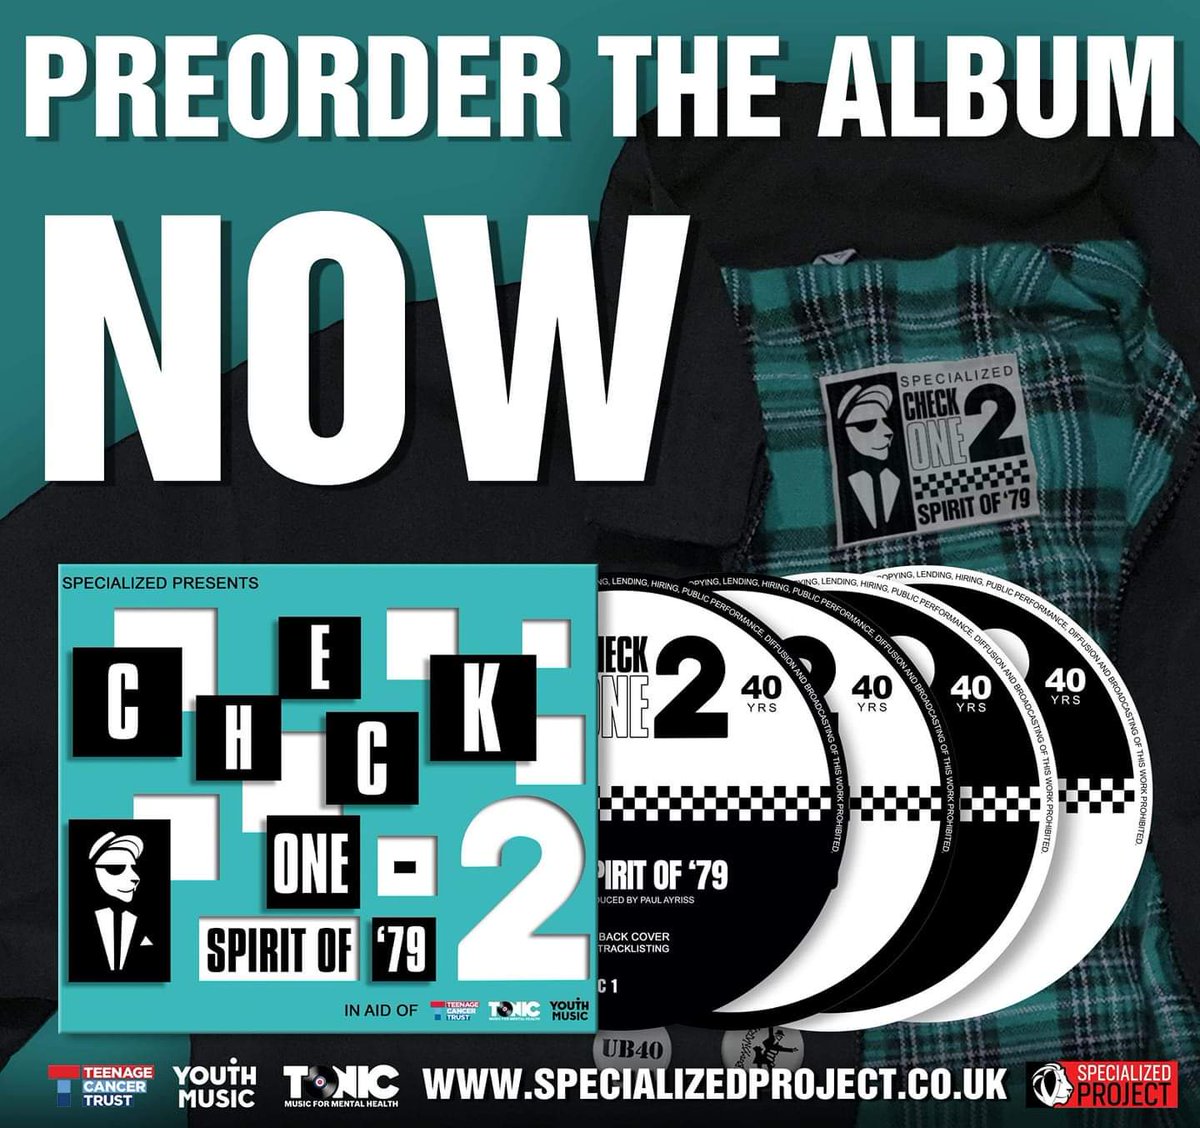 Here we go.
This is limited edition.
This is Specialized 8
This Are 2Tone.
This is Check One, 2 -The Sprit of '79.
This is the pre-order....

specializedproject.co.uk/shopping/check…

@TeenageCancer @TonicMusicMH @youthmusic 
#Ska #2Tone #Checkonetwo
#Thespecials #specialized